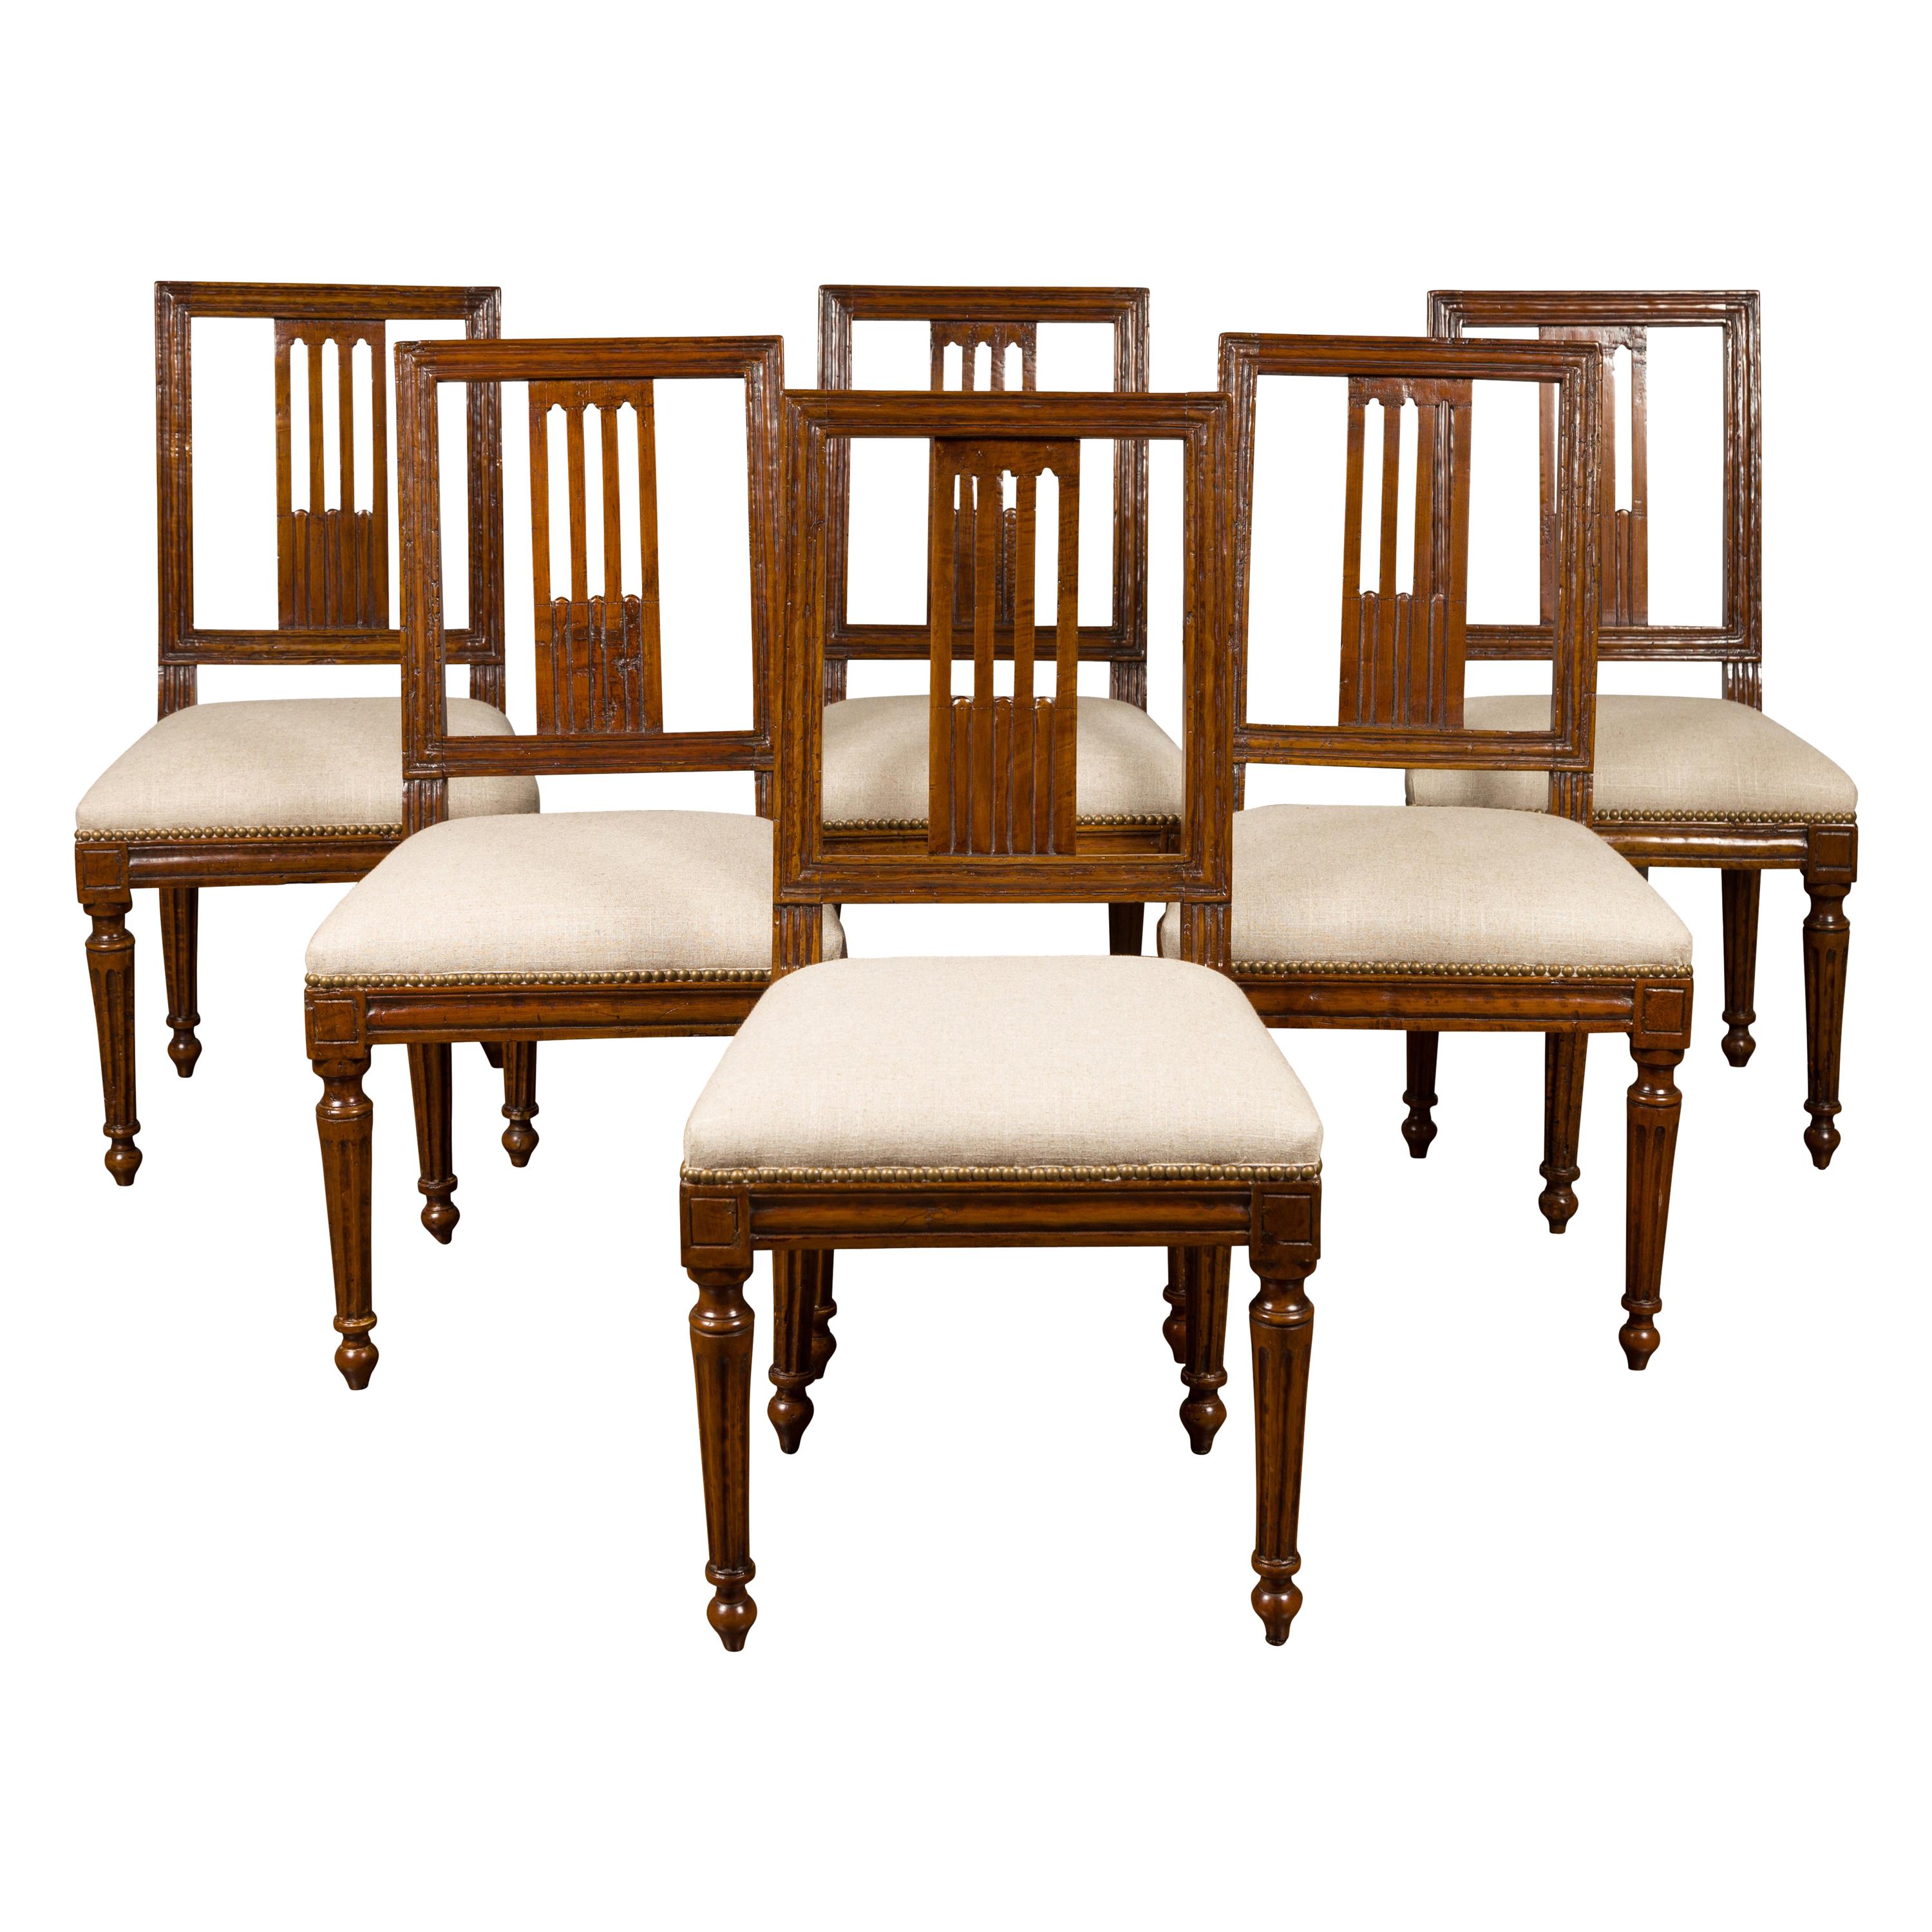 Set of Six Italian Oak Dining Room Side Chairs with Fluted Legs, circa 1870